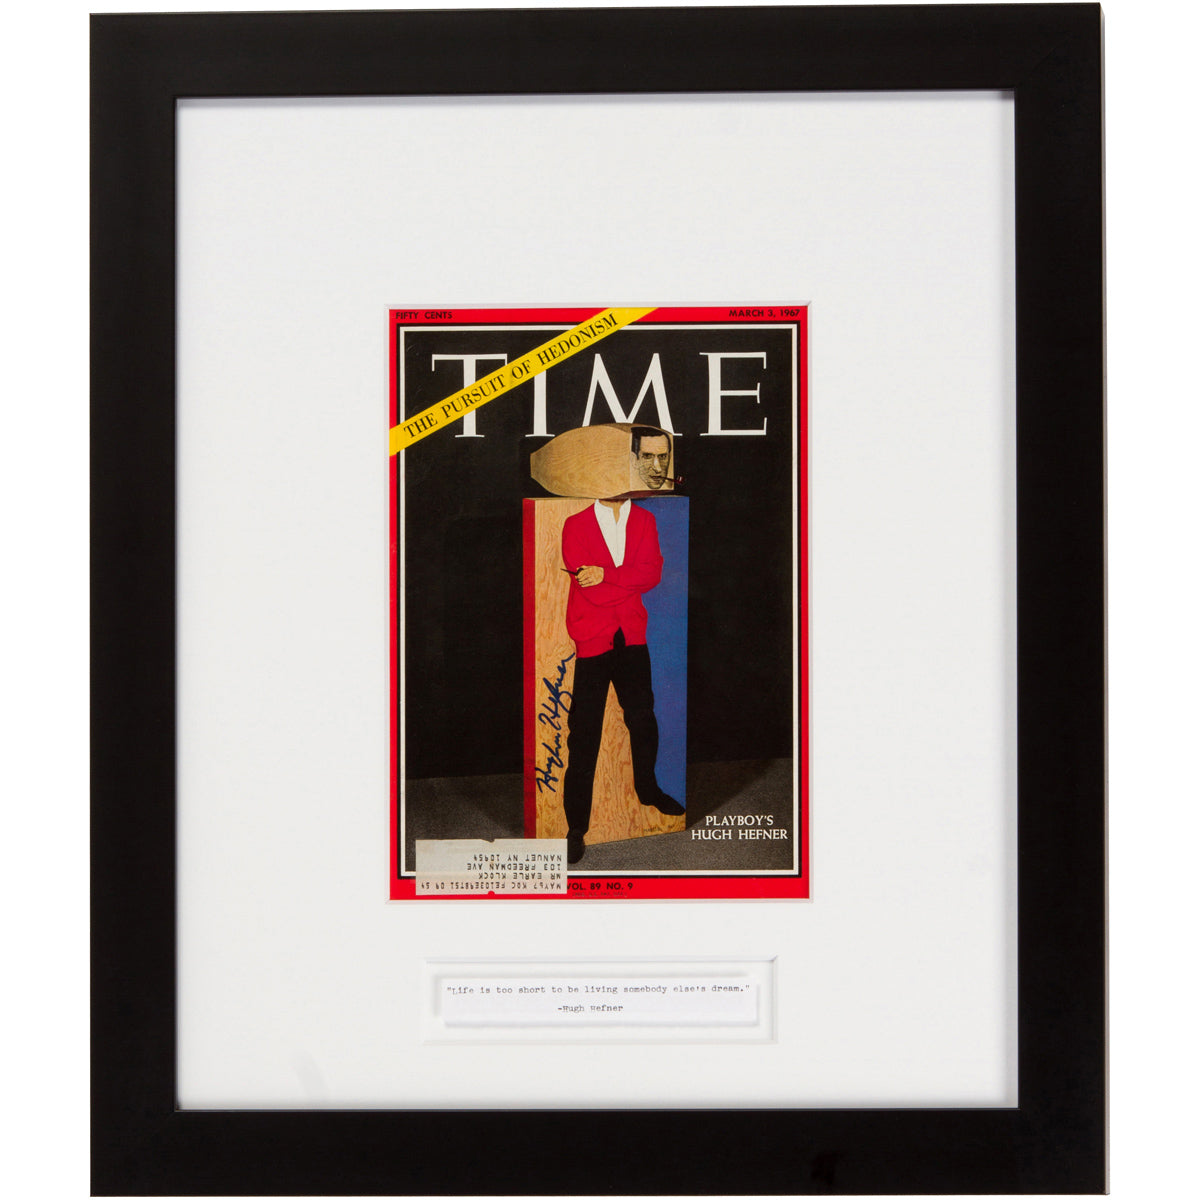 Hugh Hefner Signed 1967 TIME Magazine Cover: “Life is too short to be living someone else’s dream.”